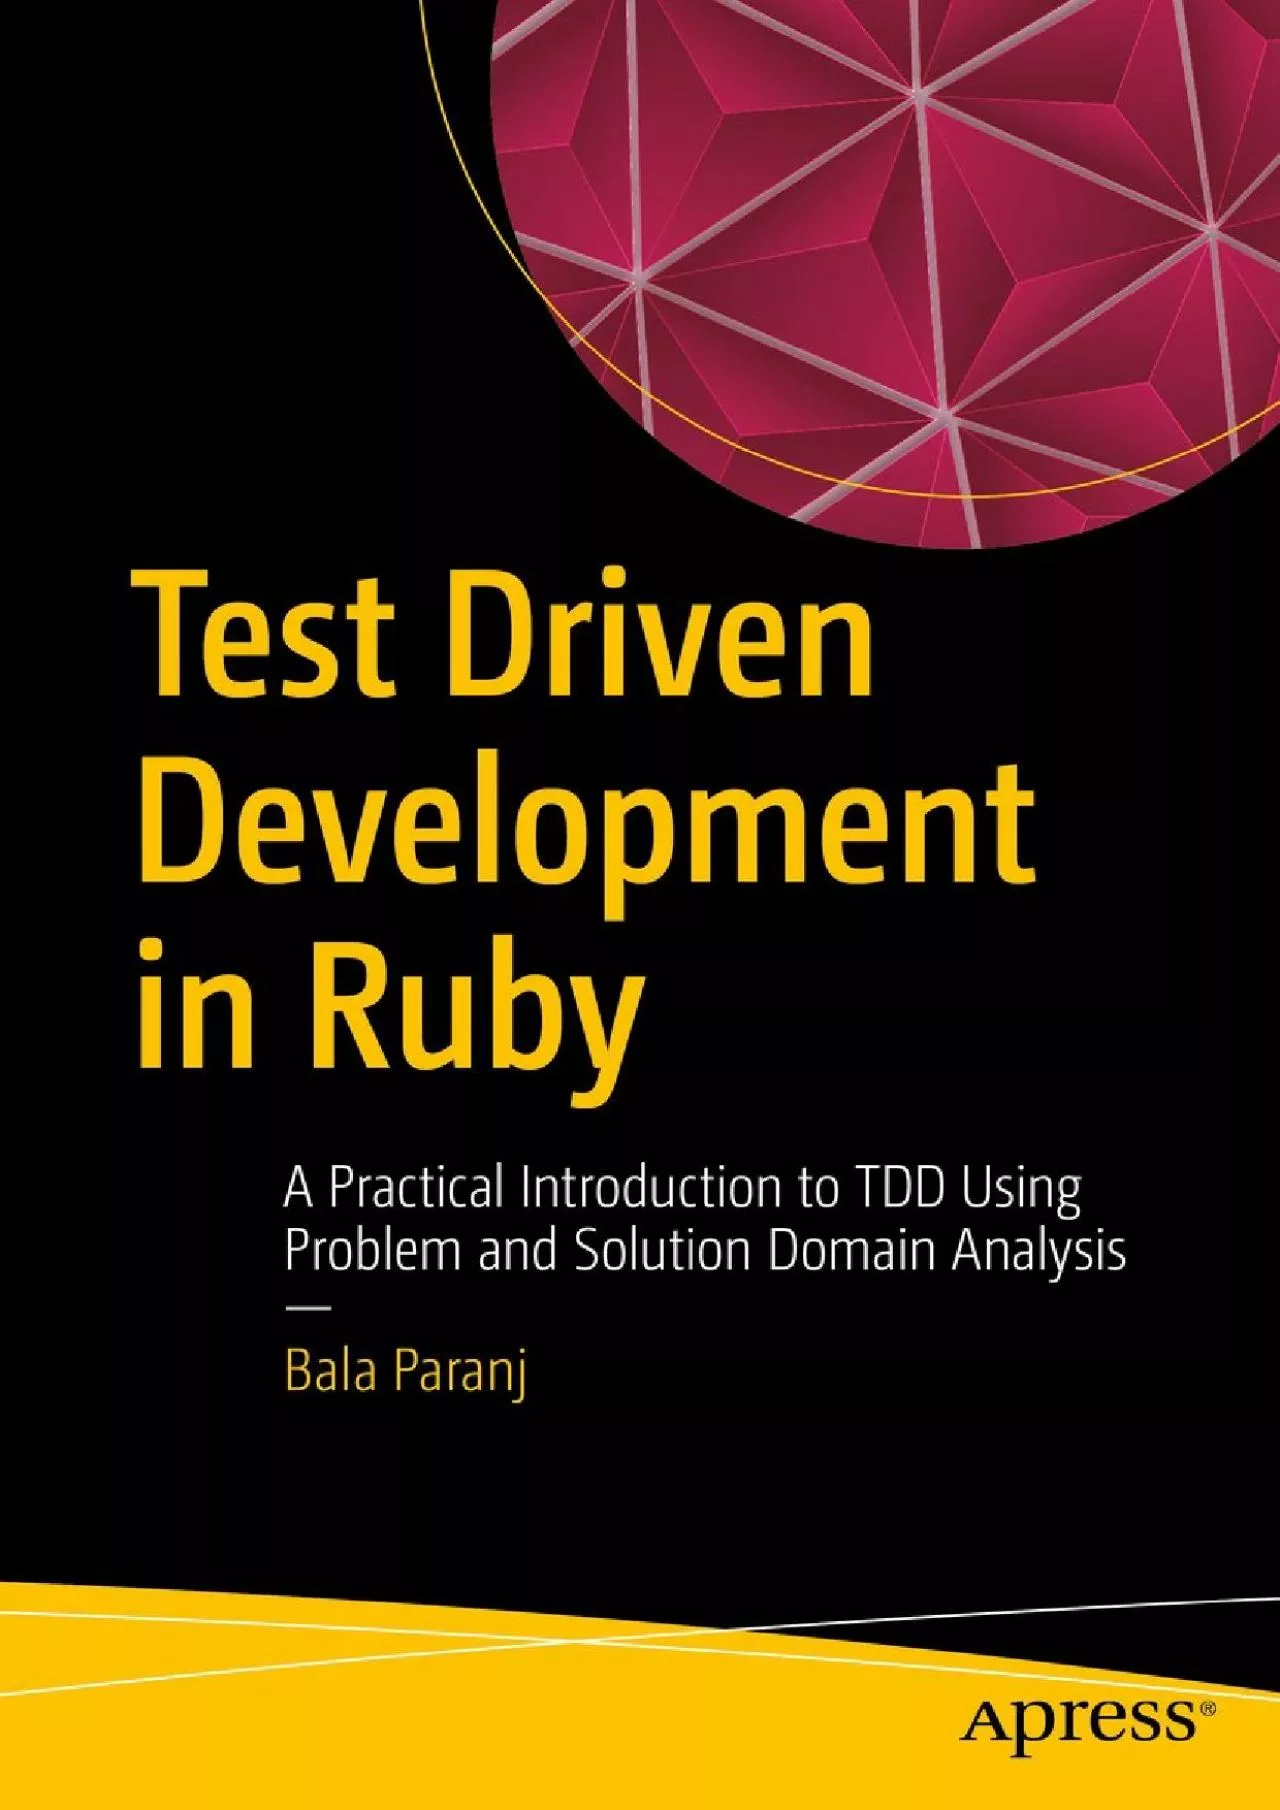 [DOWLOAD]-Test Driven Development in Ruby: A Practical Introduction to TDD Using Problem